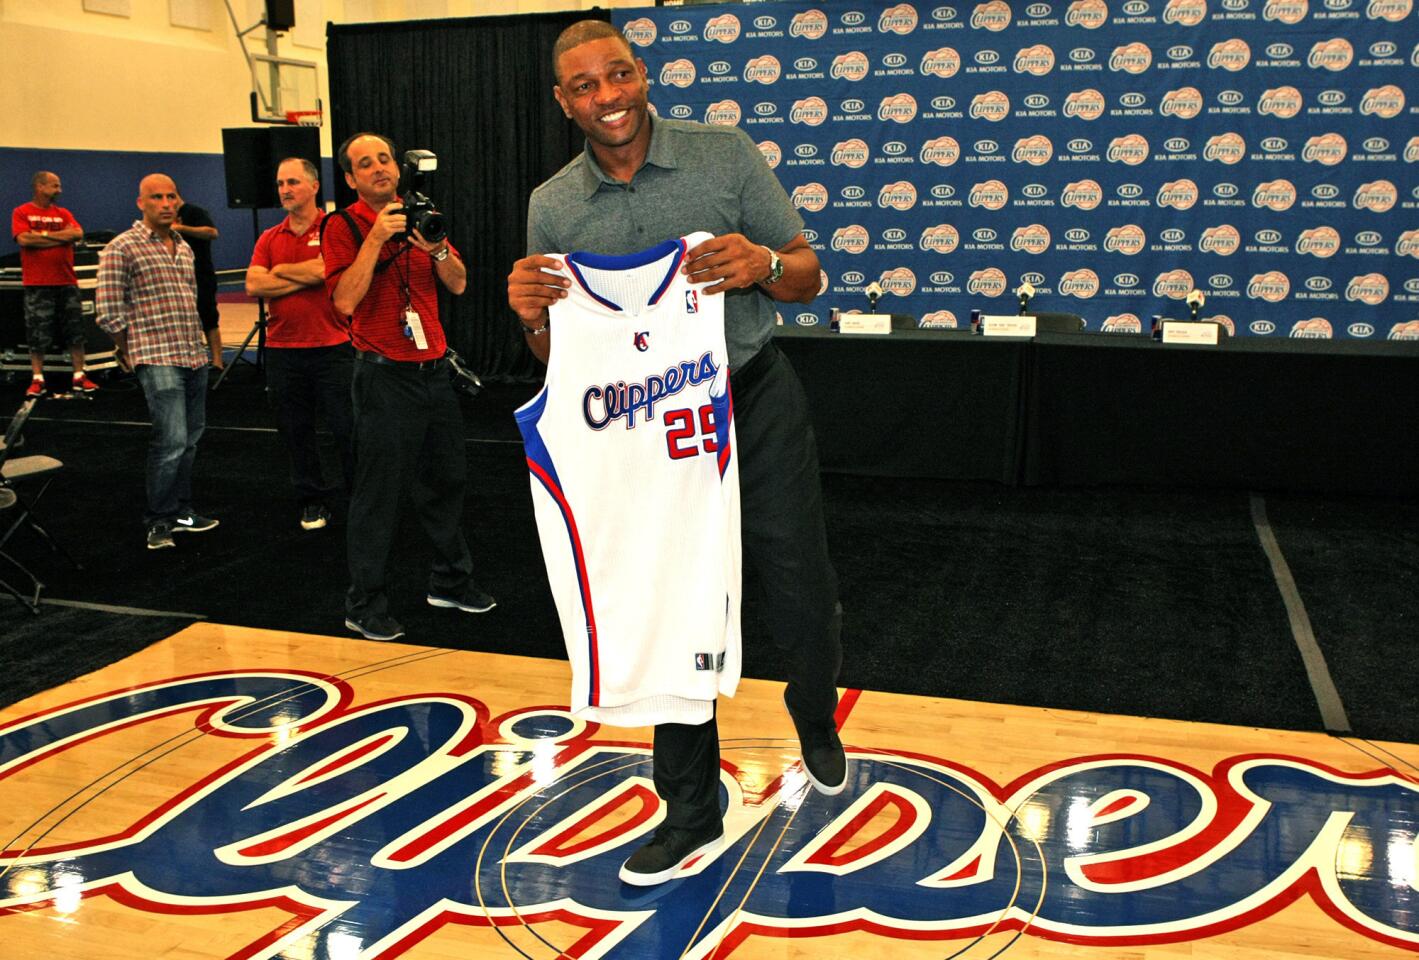 Former Boston Celtics coach Glenn "Doc" Rivers holds a Clippers jersey with his number and name on it while meeting members of the press introducing him as the new coach of the Los Angeles Clippers at the Clippers Training facility in Playa Vista.